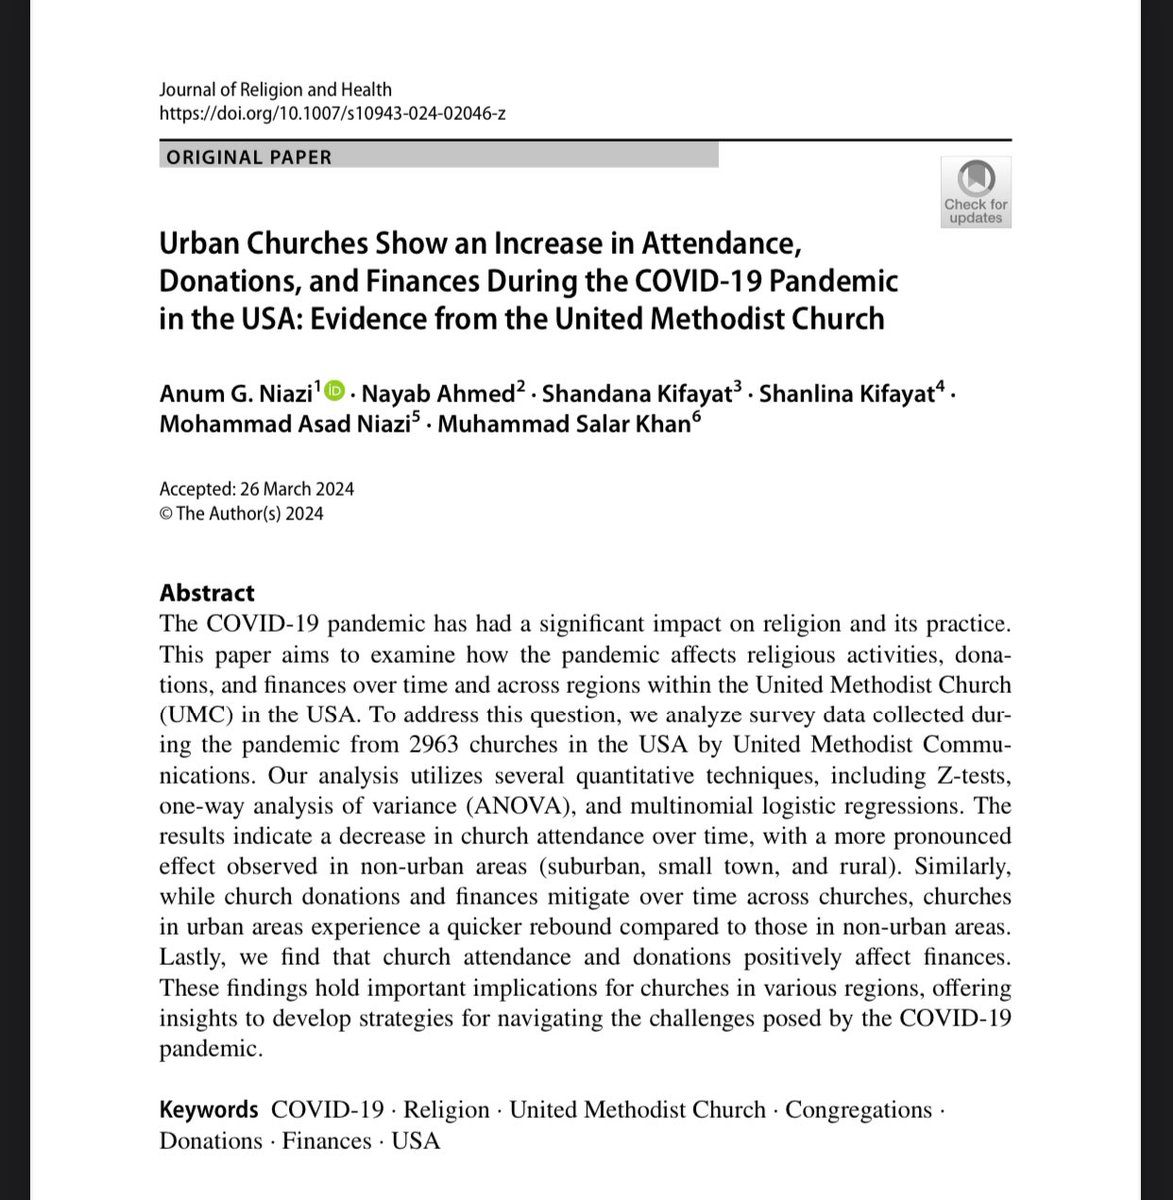 My team & I studied the economics of the United Methodist Church during COVID-19 for the Journal of Religion and Health. One notable finding: urban churches saw increased attendance, donations, & finances. More at 🔗 ⬇️ @ScharSchool @MasonResearch @Anum_N 
doi.org/10.1007/s10943…